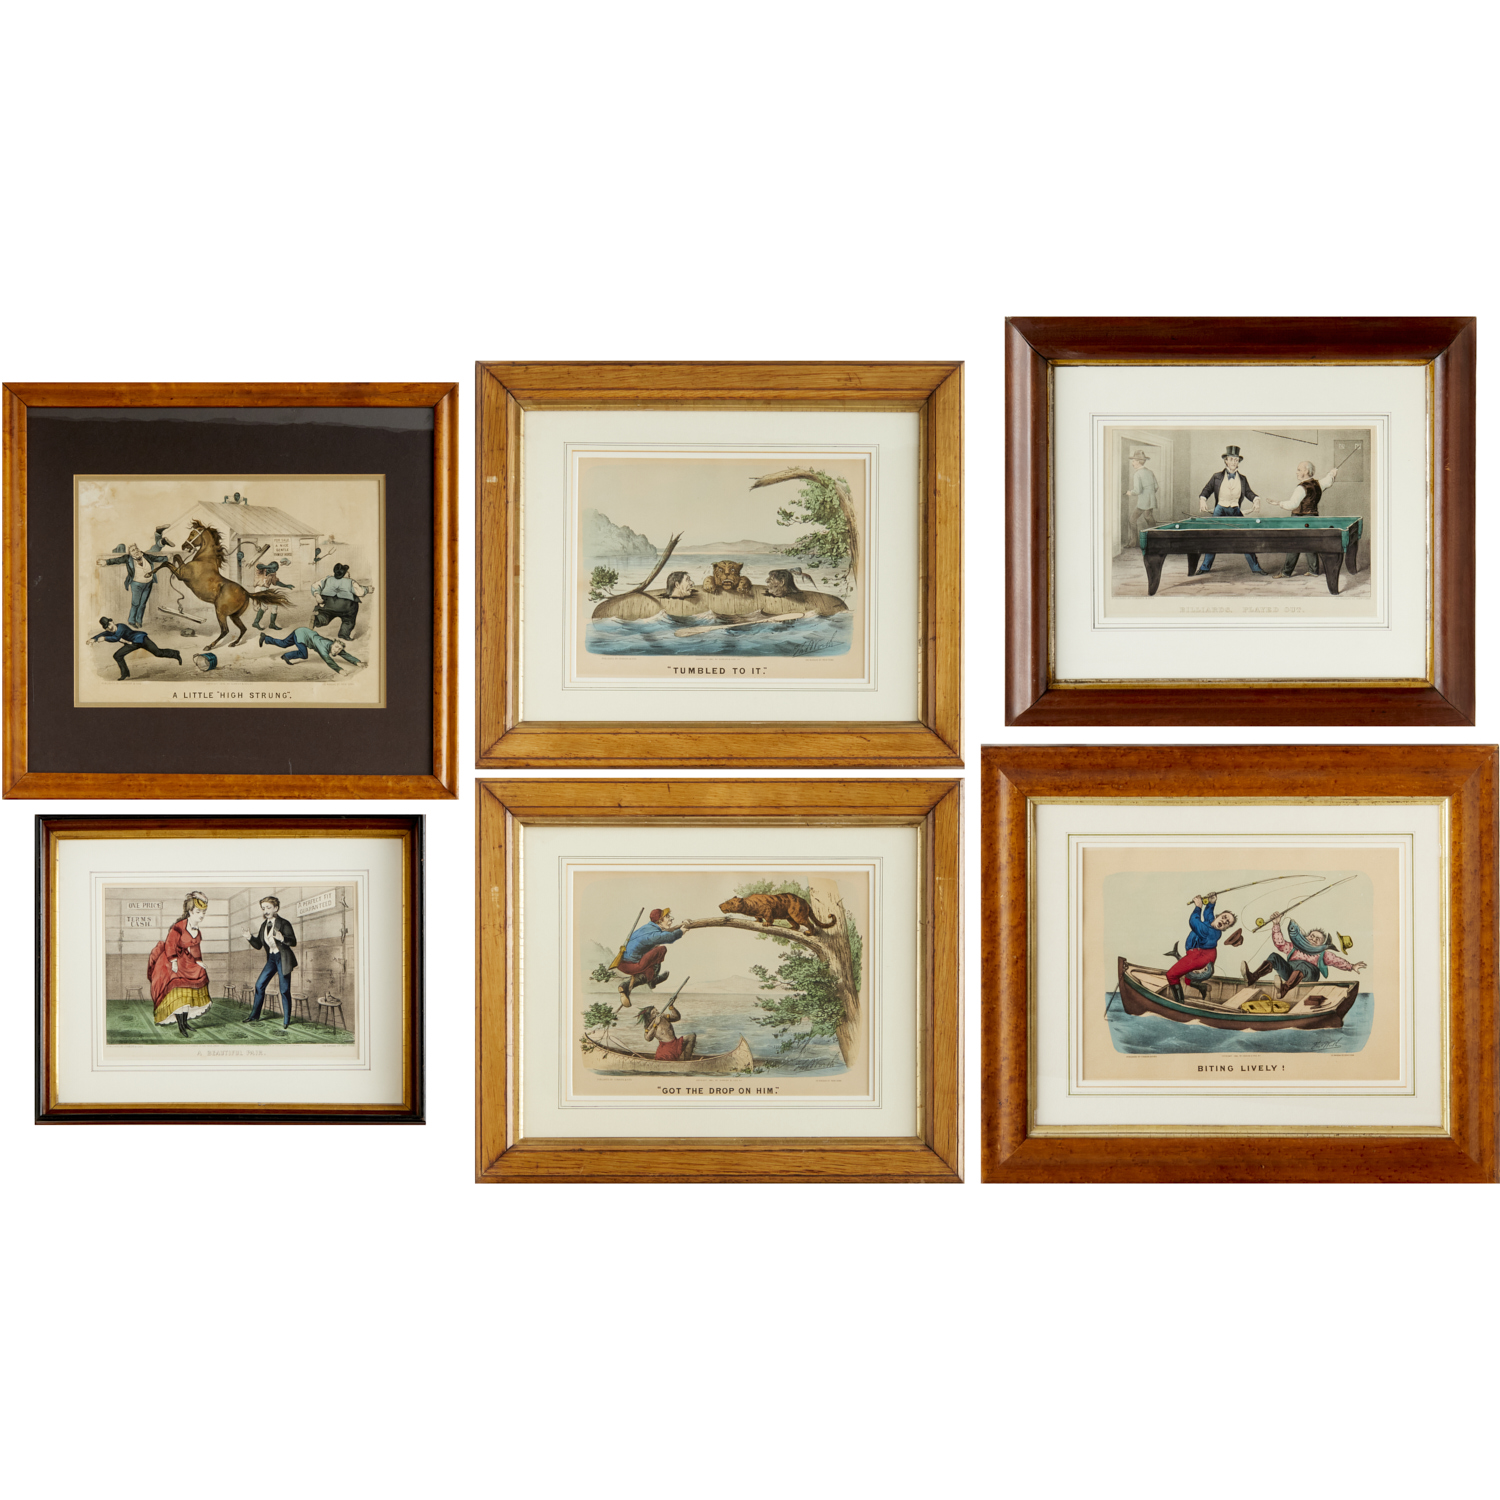 (6) CURRIER & IVES COLOR LITHOGRAPHS,